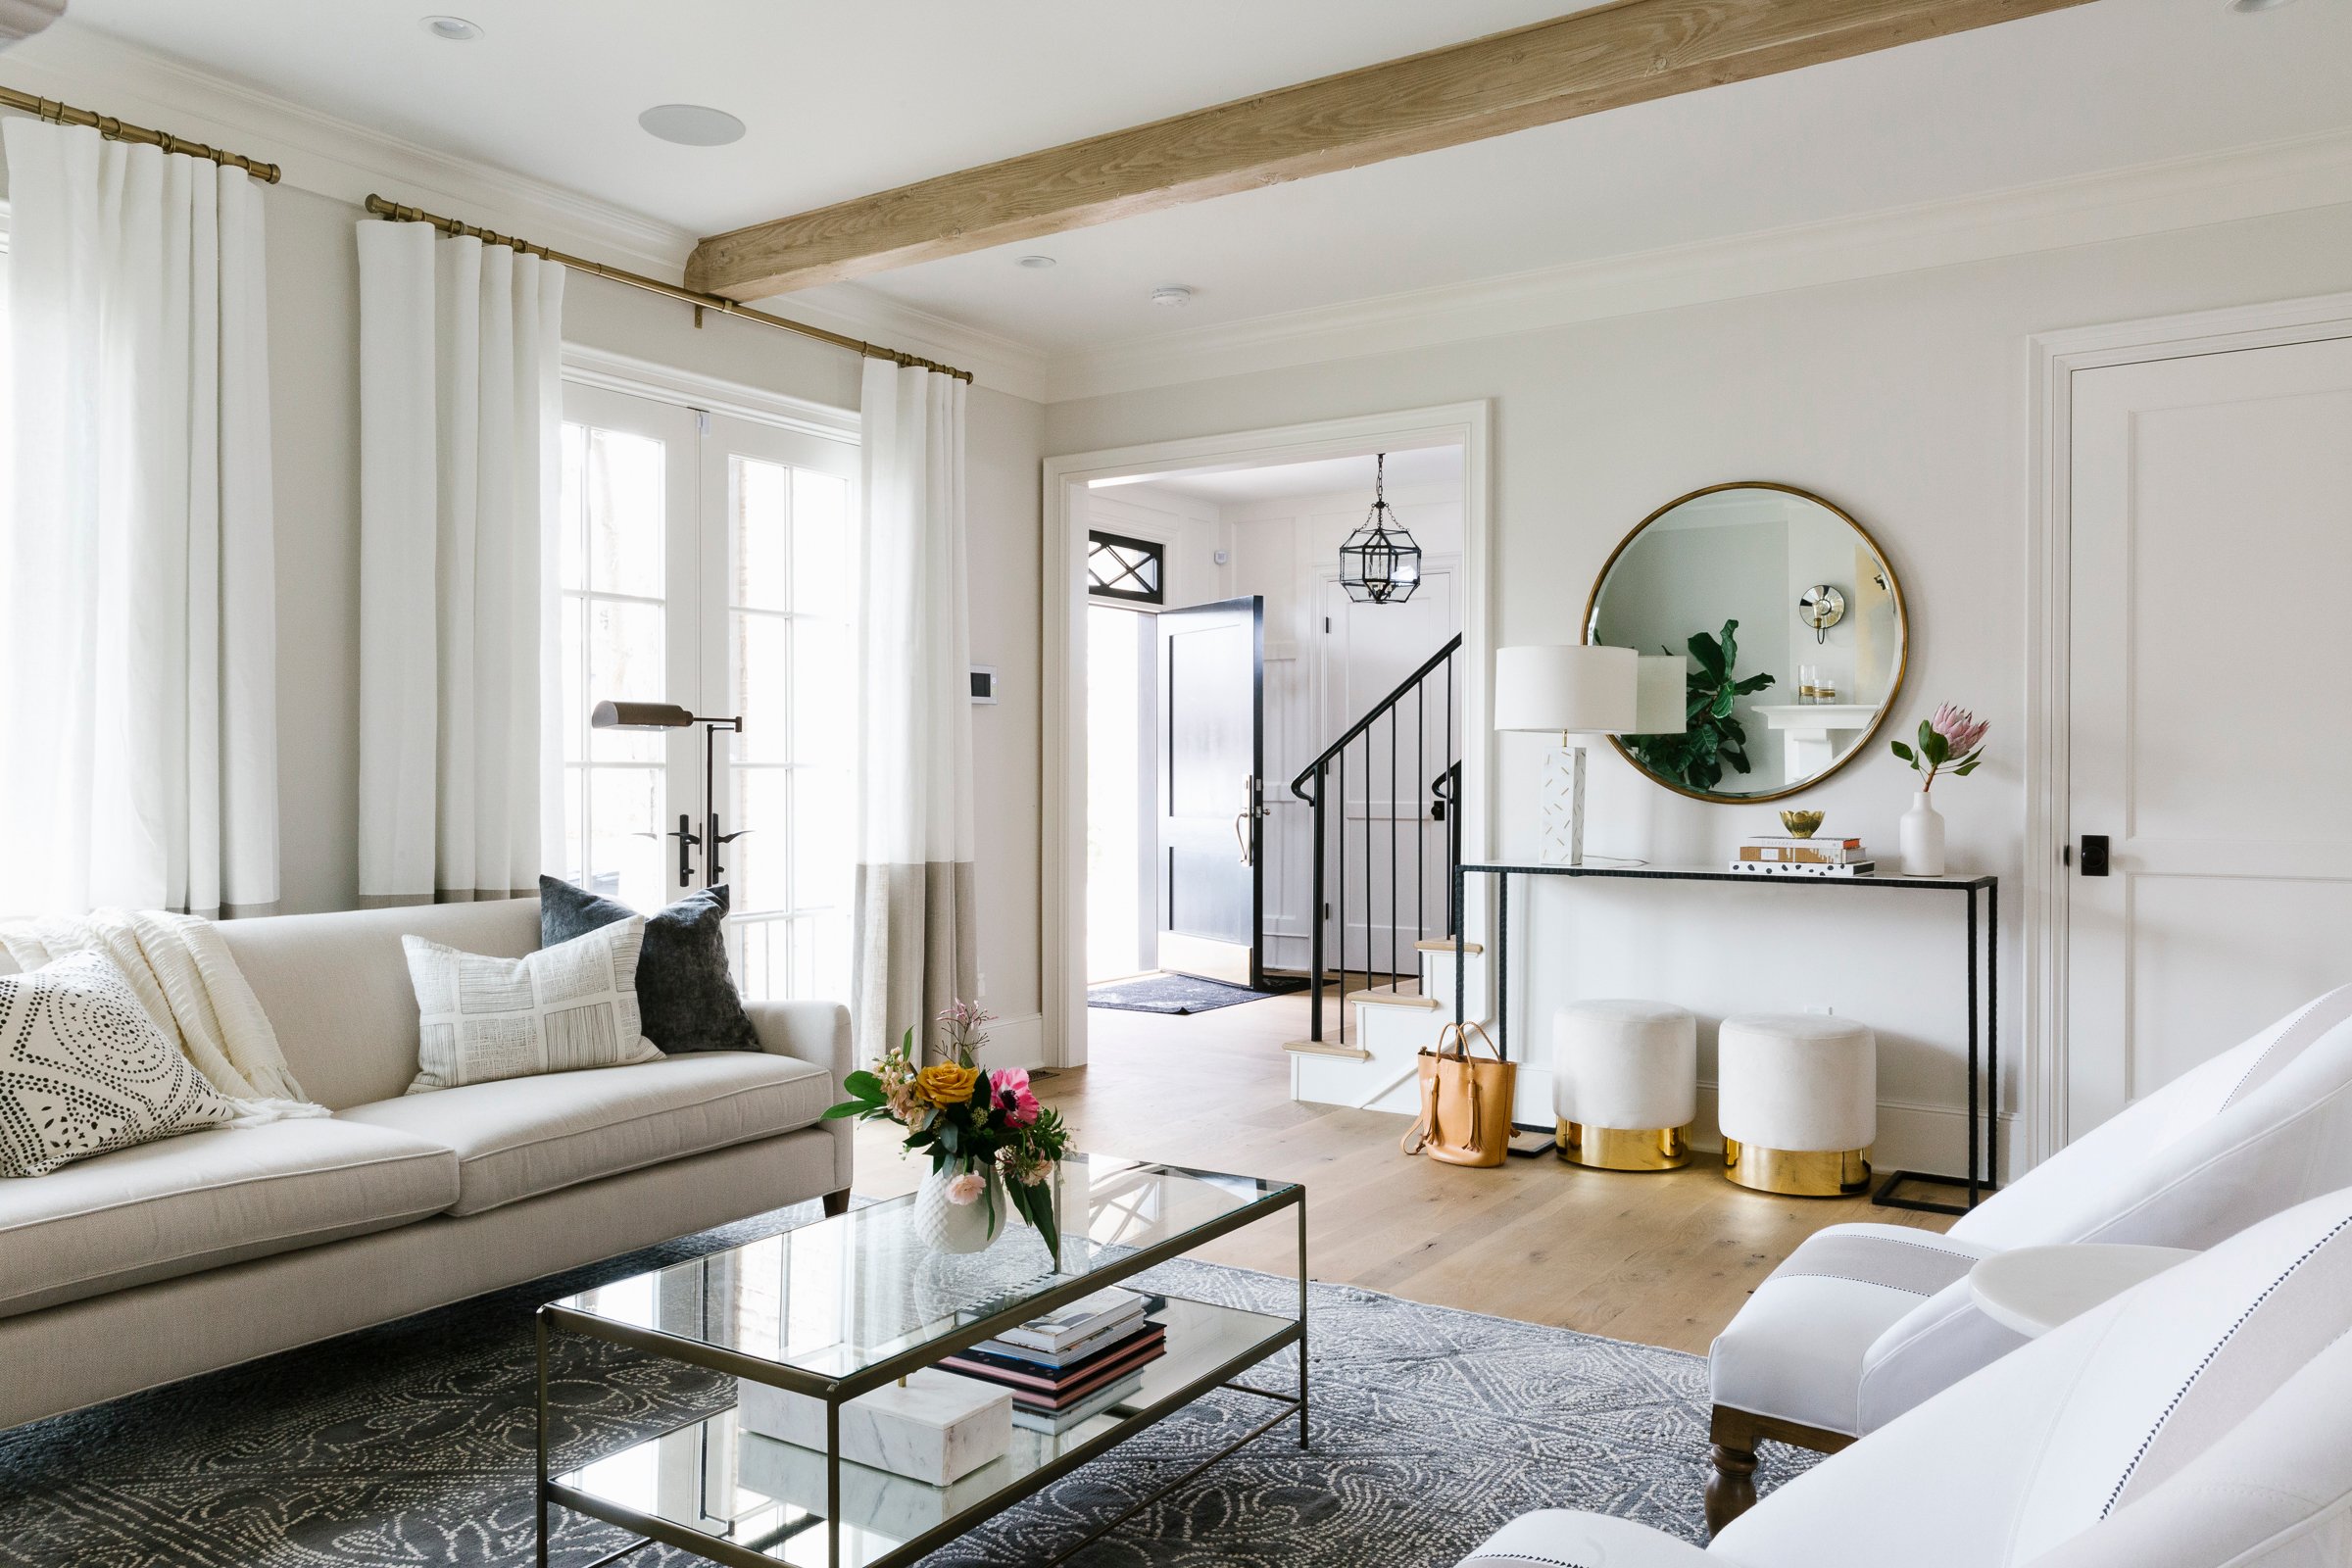 5 Living Room Design Mistakes to Avoid – 2019 Guide - Tilottoma Limited